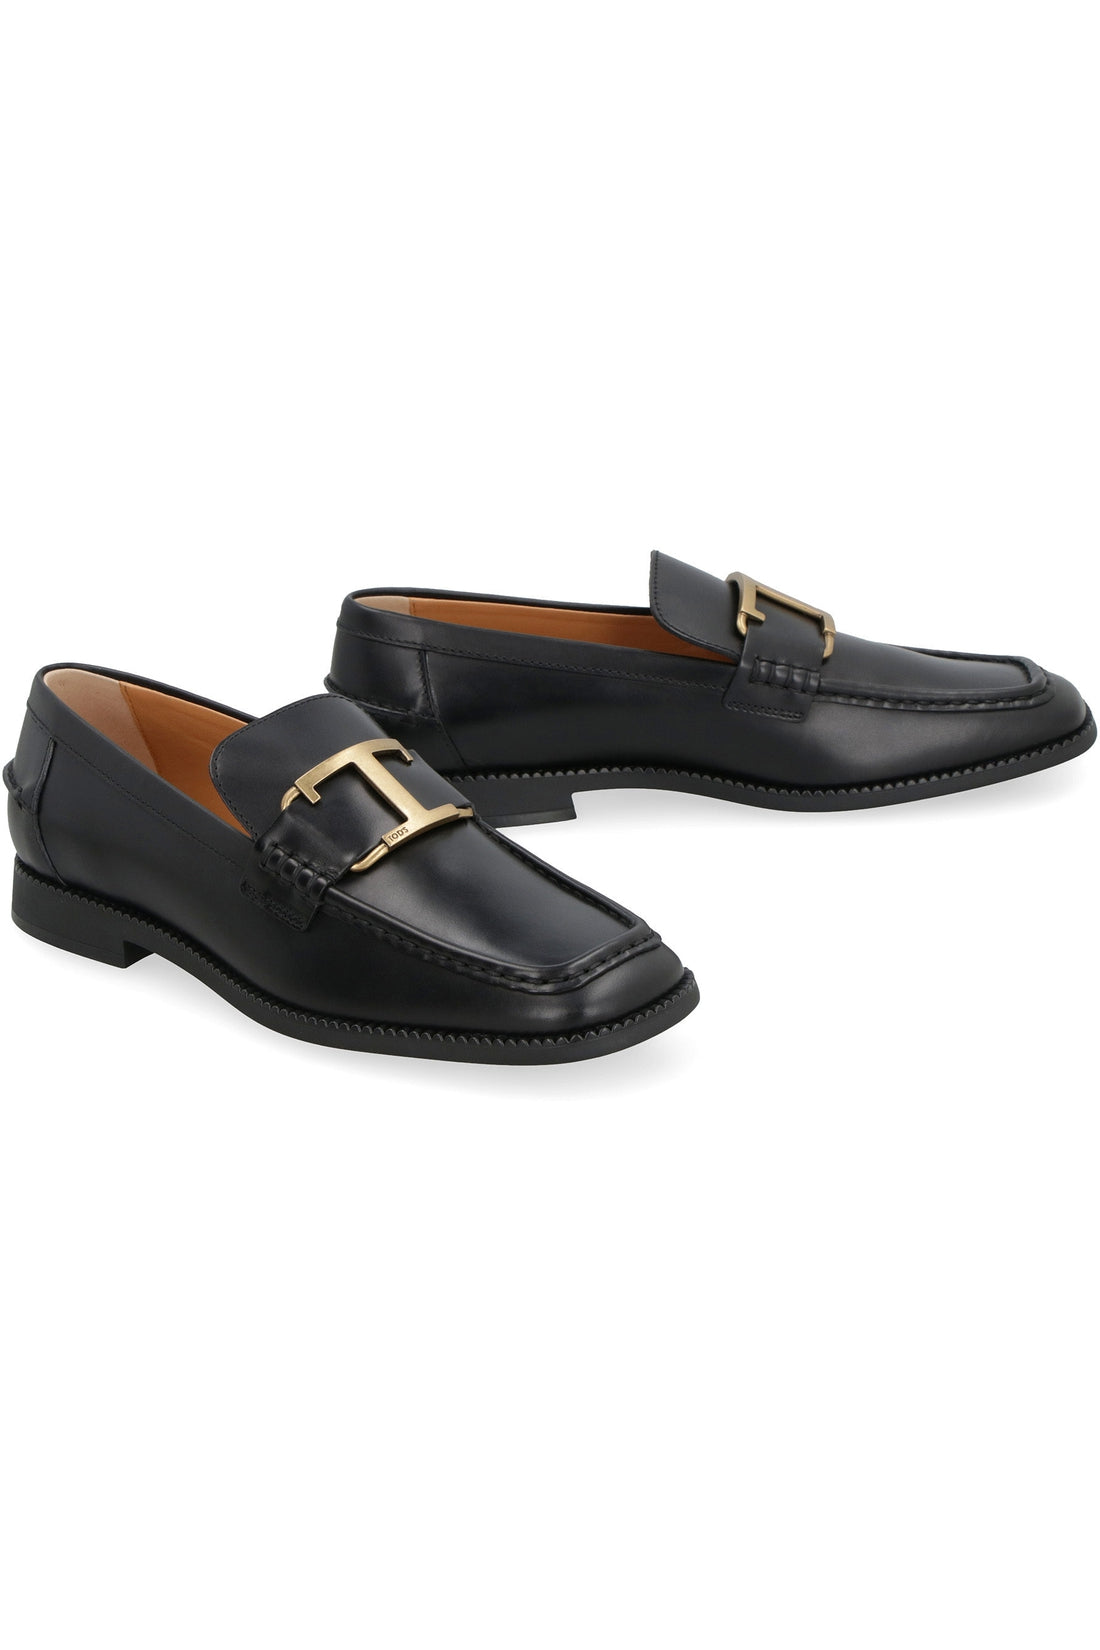 Tod's-OUTLET-SALE-Logo detail leather loafers-ARCHIVIST